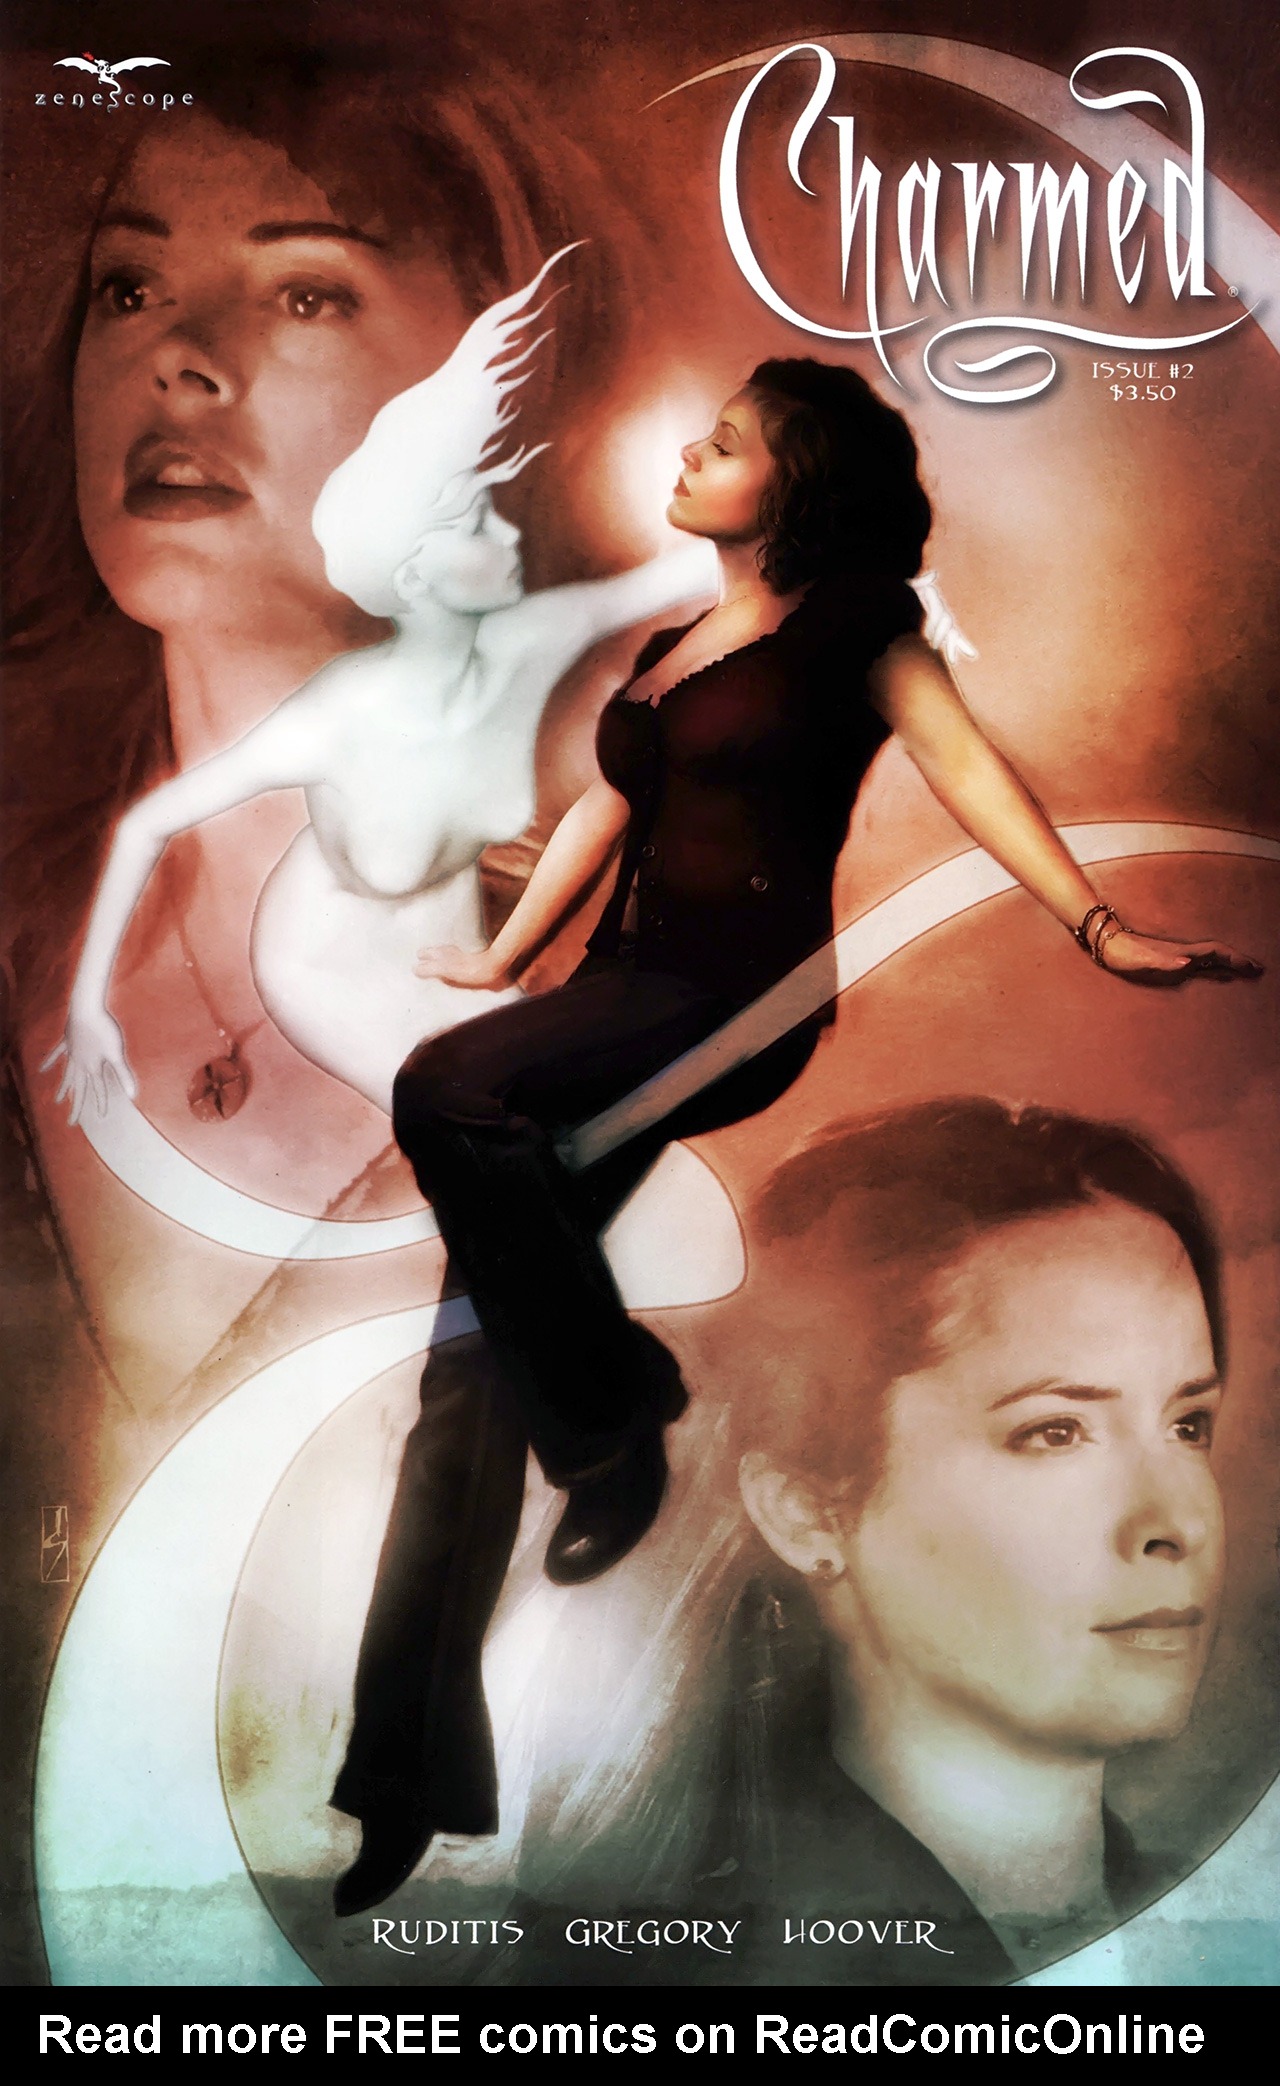 Read online Charmed comic -  Issue #2 - 2